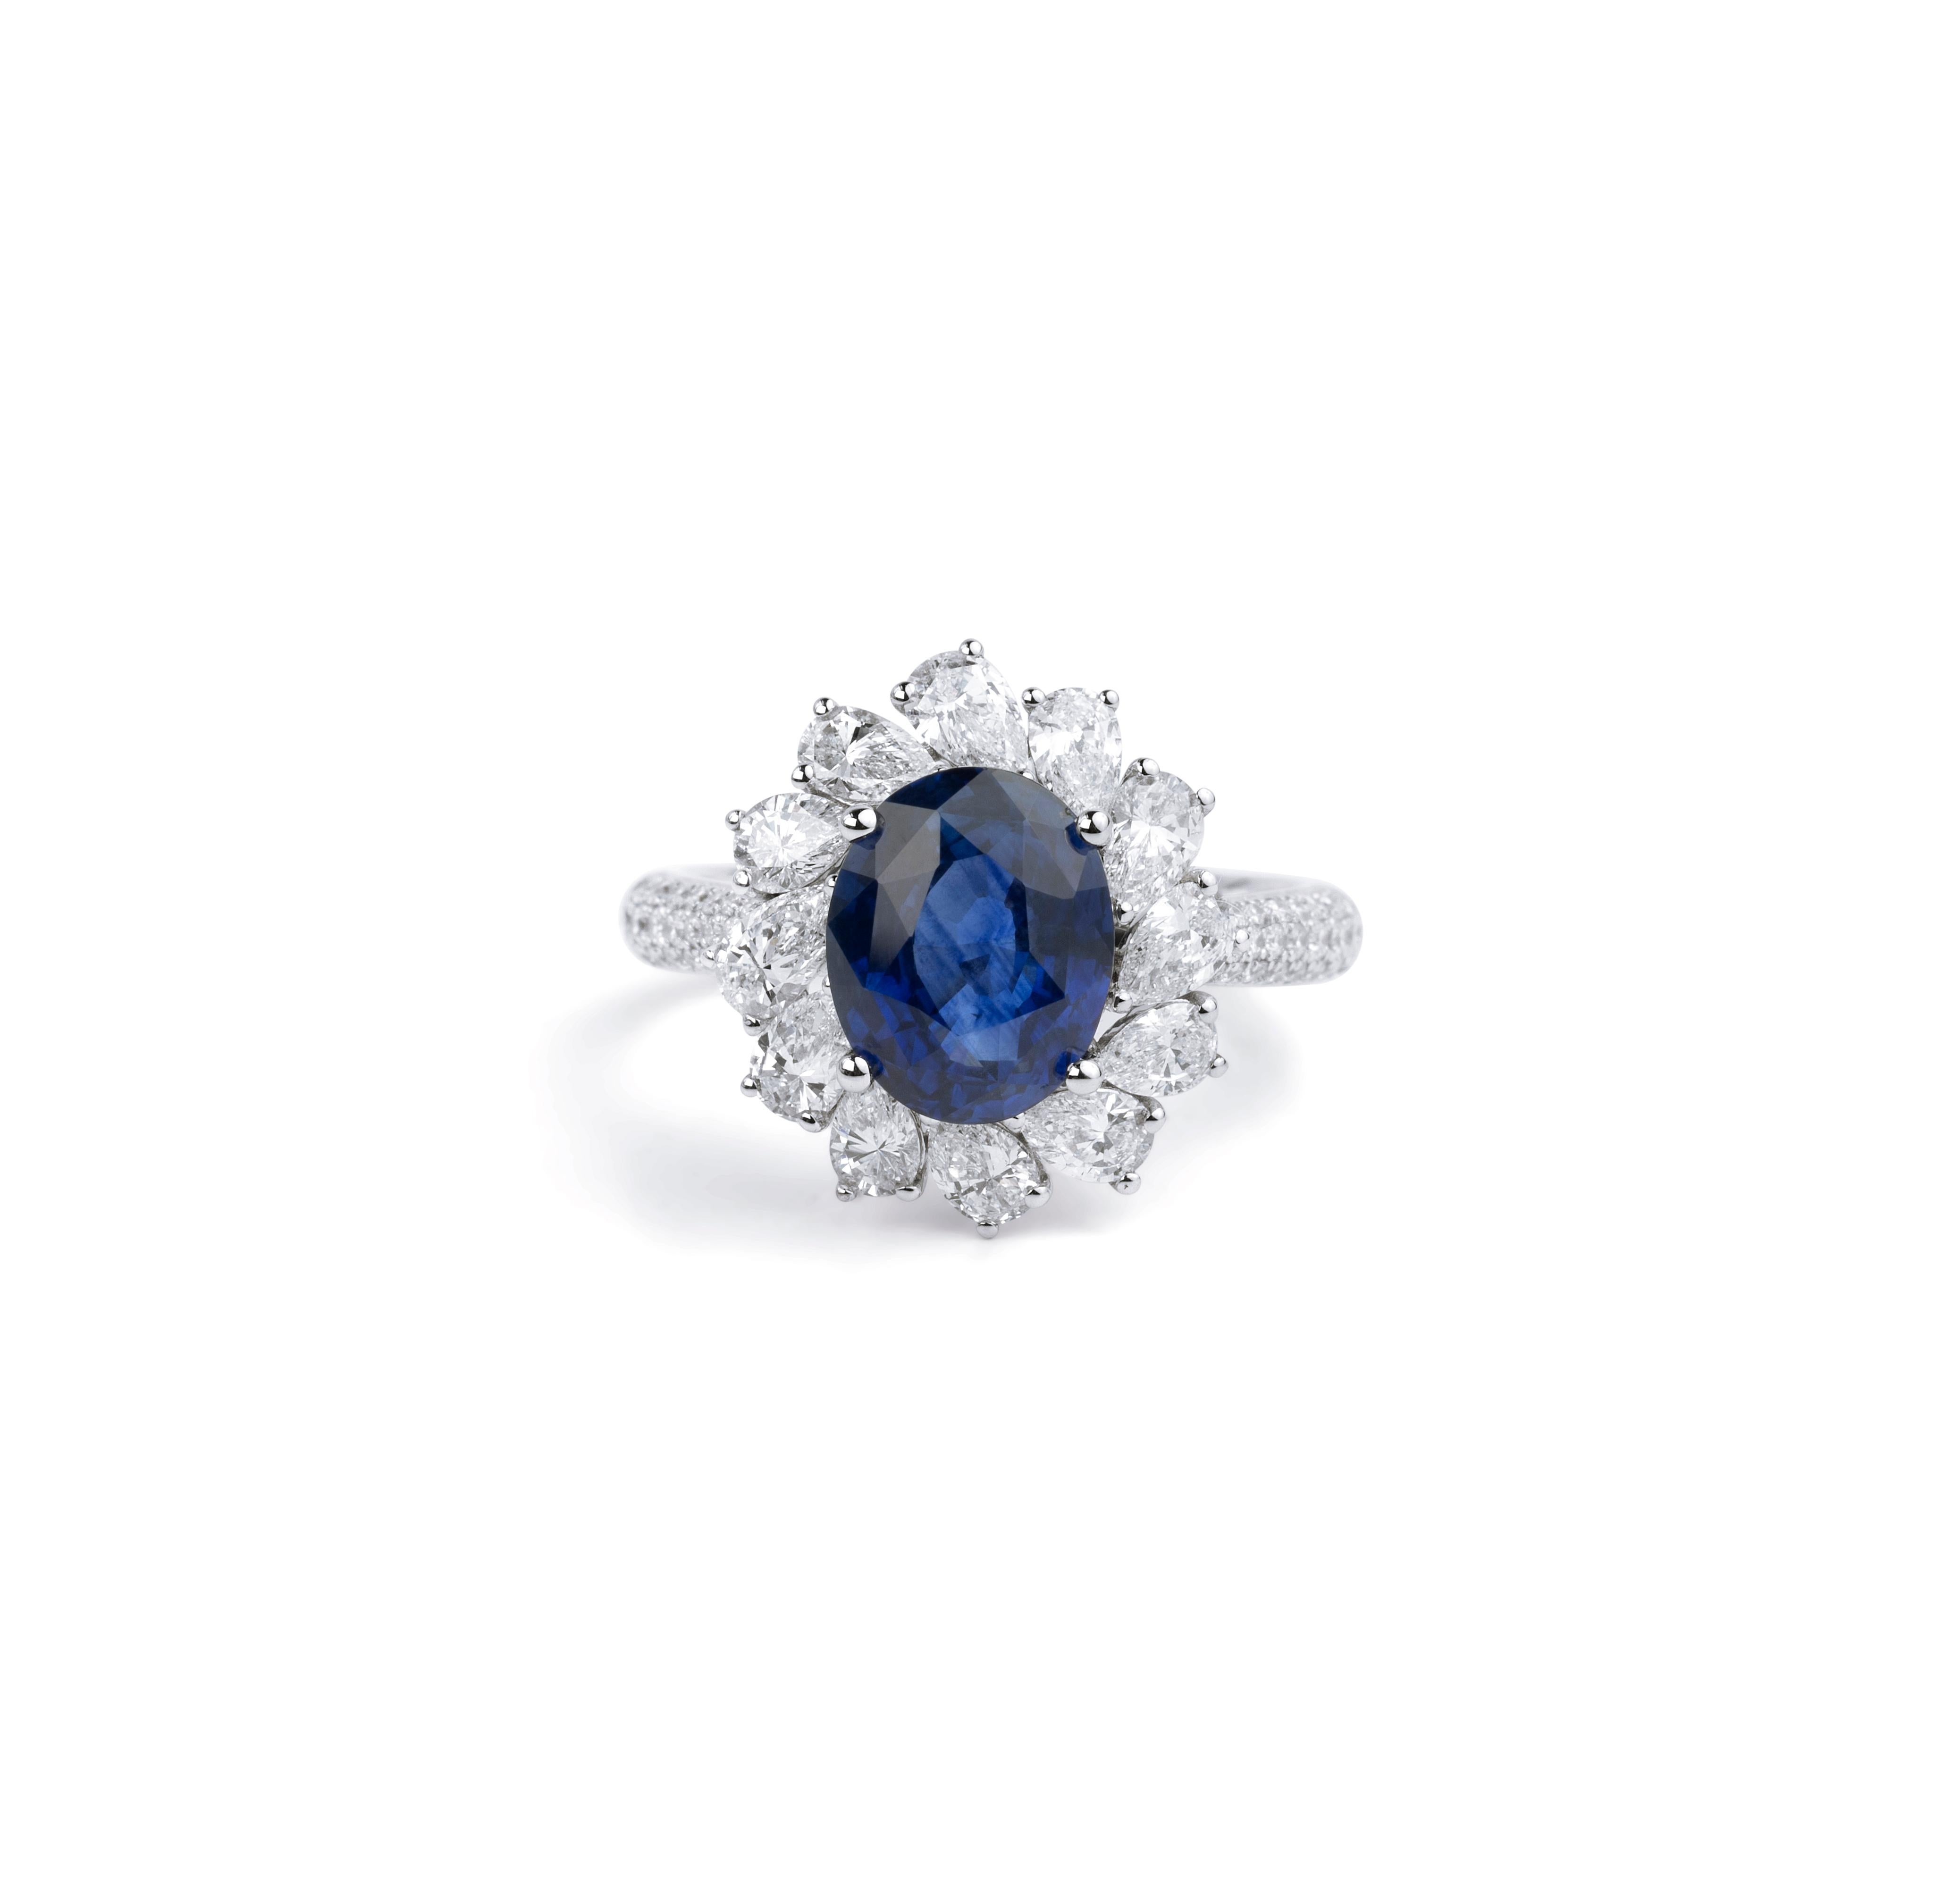 Oval Natural Sapphire Diamond Pear Halo Cocktail Engagement Ring 18k White Gold

Available in 18k white gold.

Same design can be made also with other custom gemstones per request.

Product details:

- Solid gold

- Diamond - approx. 1.71 carat

-